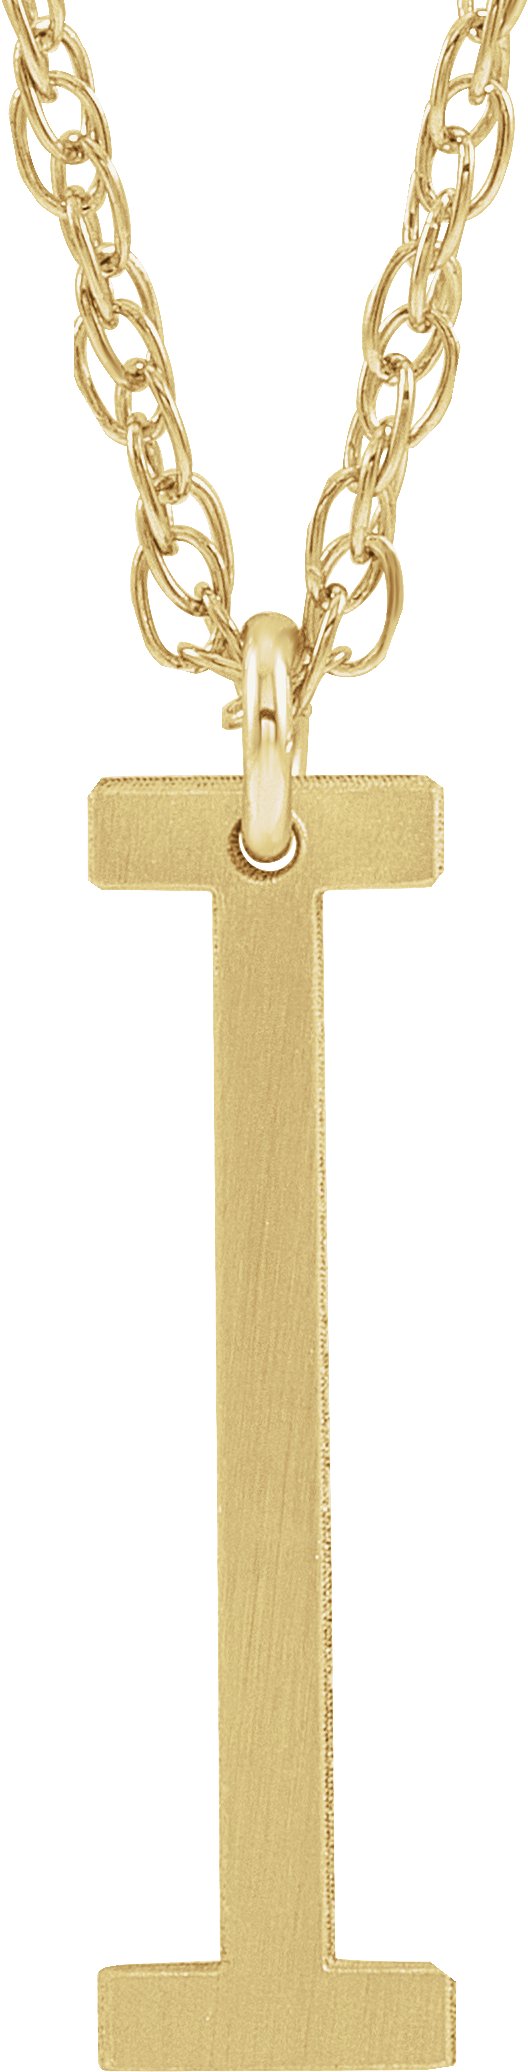 14K Yellow Gold-Plated Sterling Silver Block Initial I 16-18" Necklace with Brush Finish